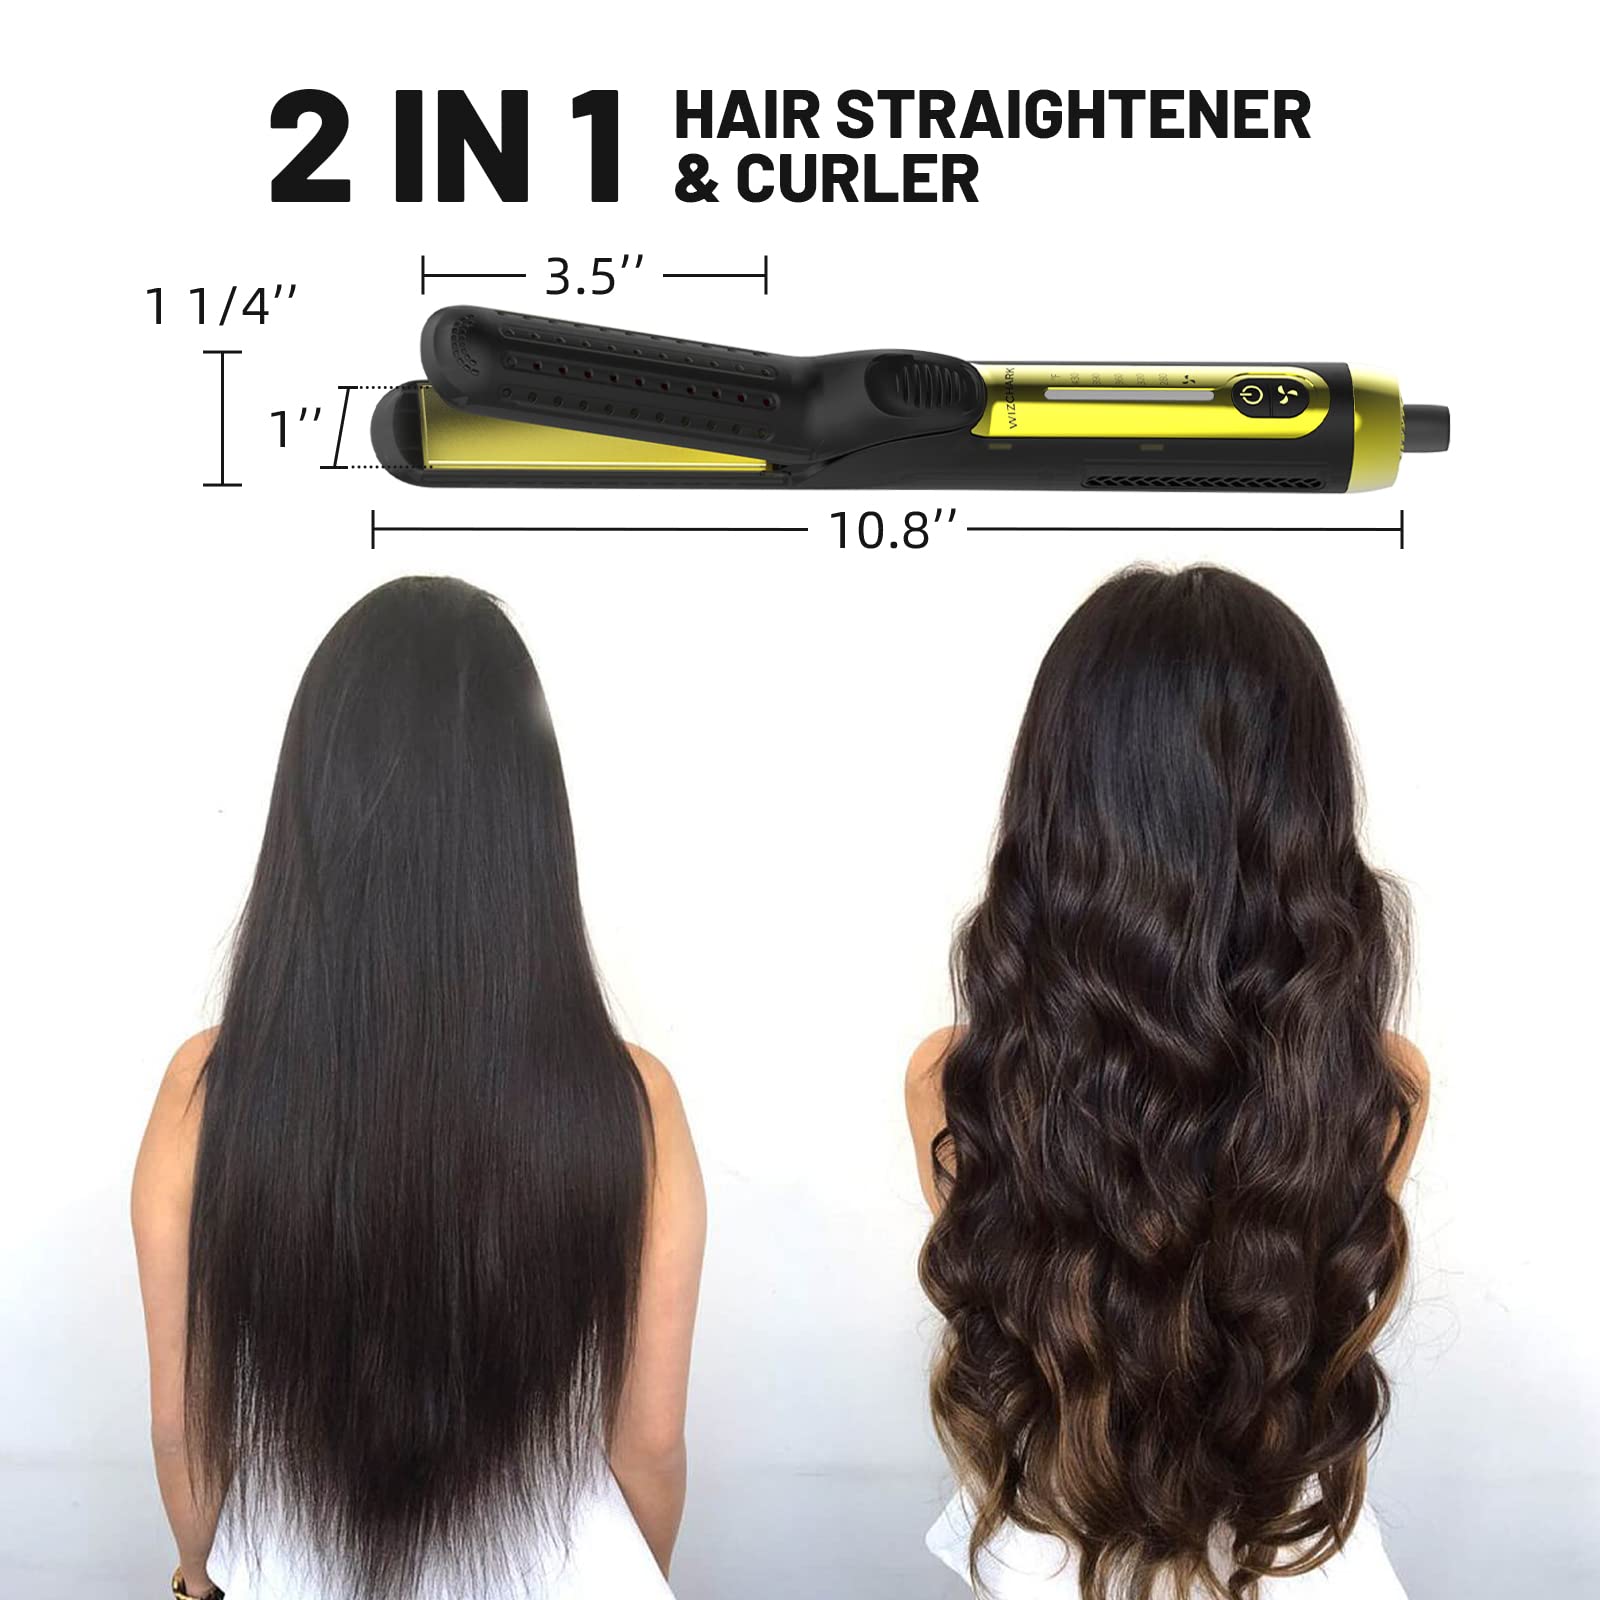 360° Airflow Styler Curling Iron Hair Straightener and Curler for All Styles with Cooling Air Vents